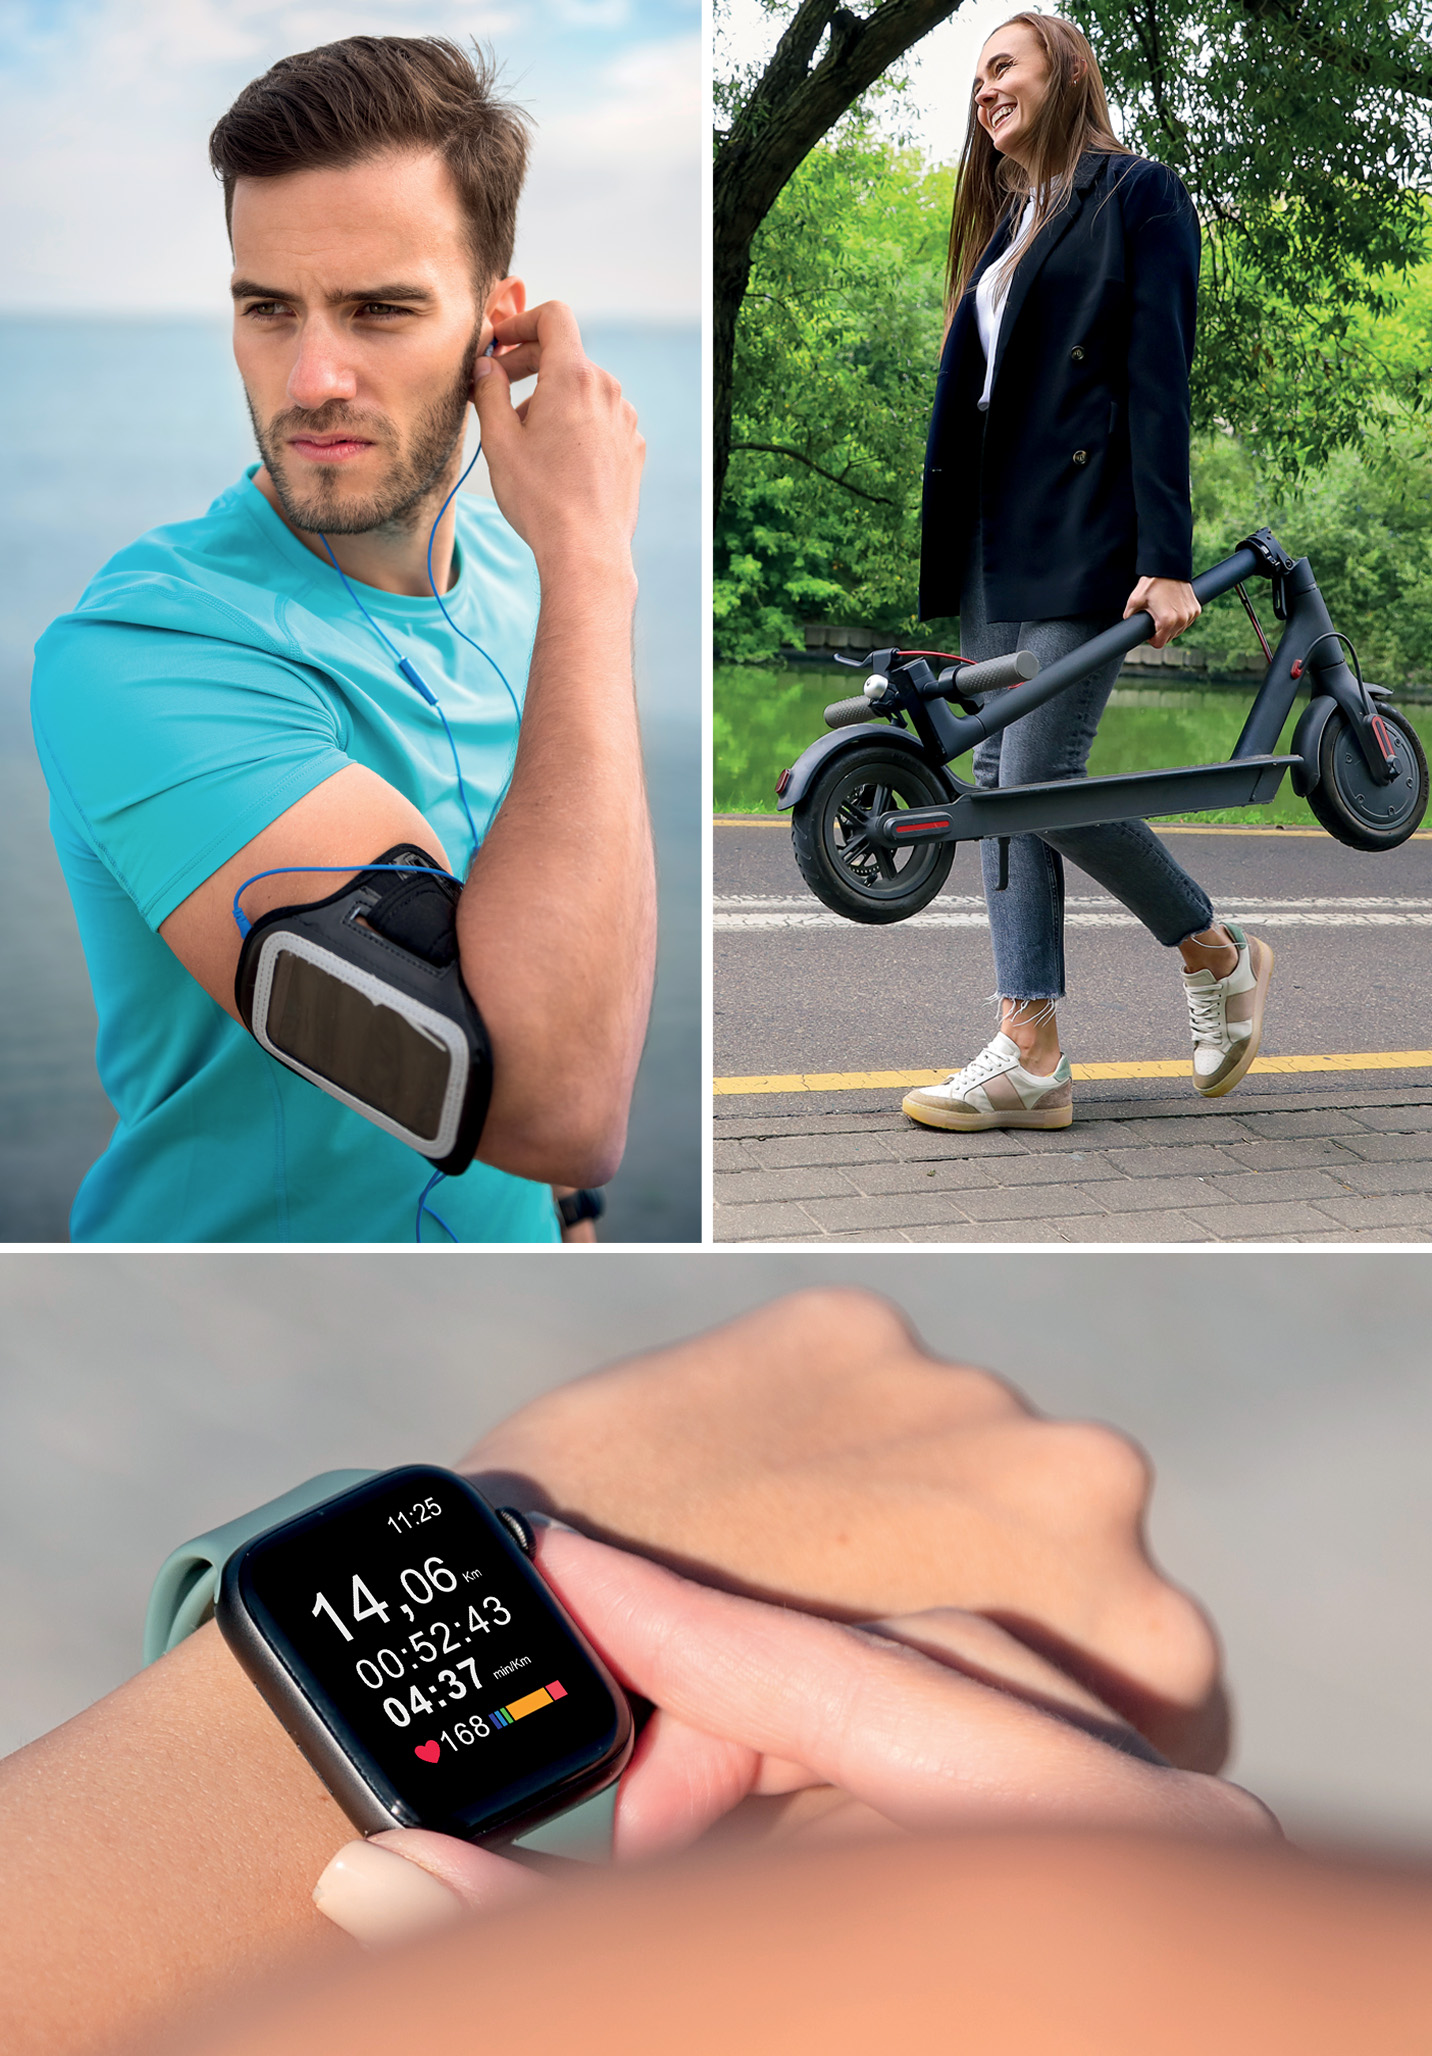 the-advanced-technologies-smartwatch-slow-mobility-smartphone-with-multiple-functions-segway-faster-mobility